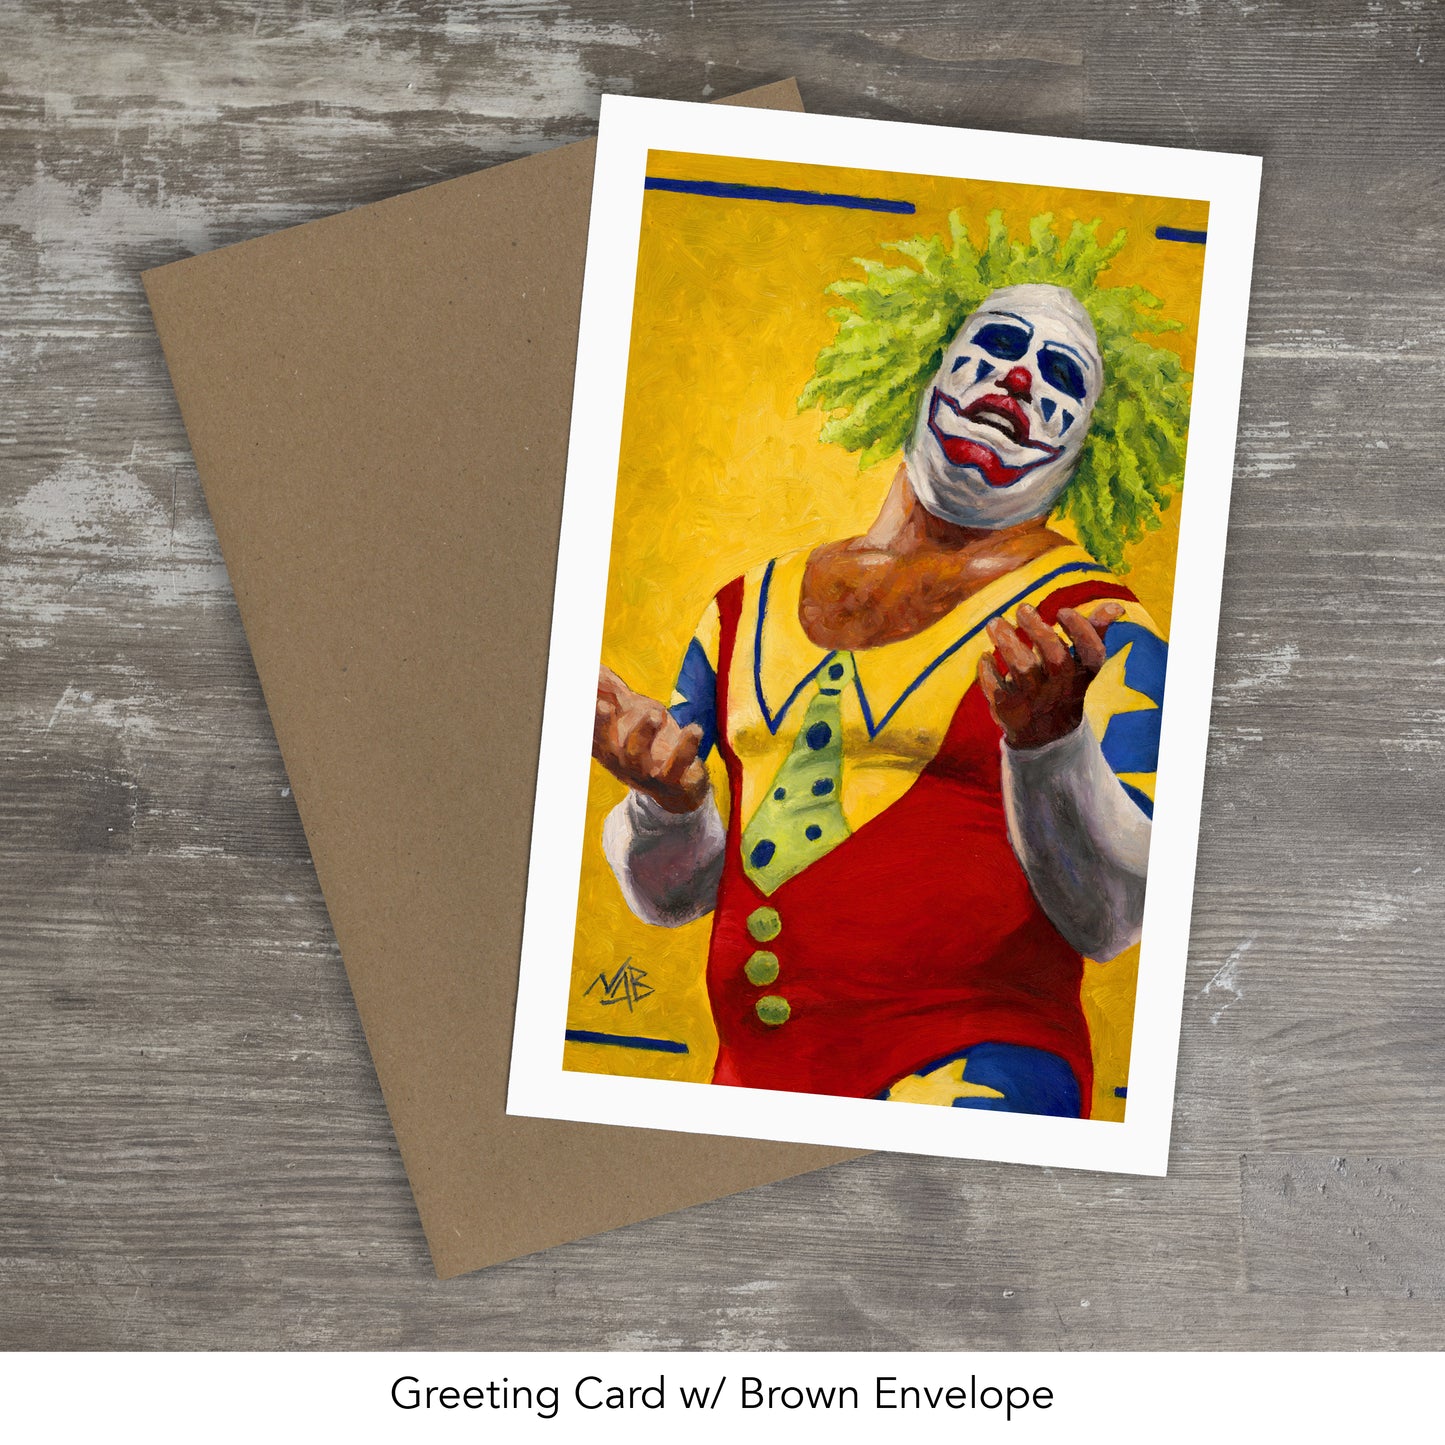 DOINK THE CLOWN // Oil Painting